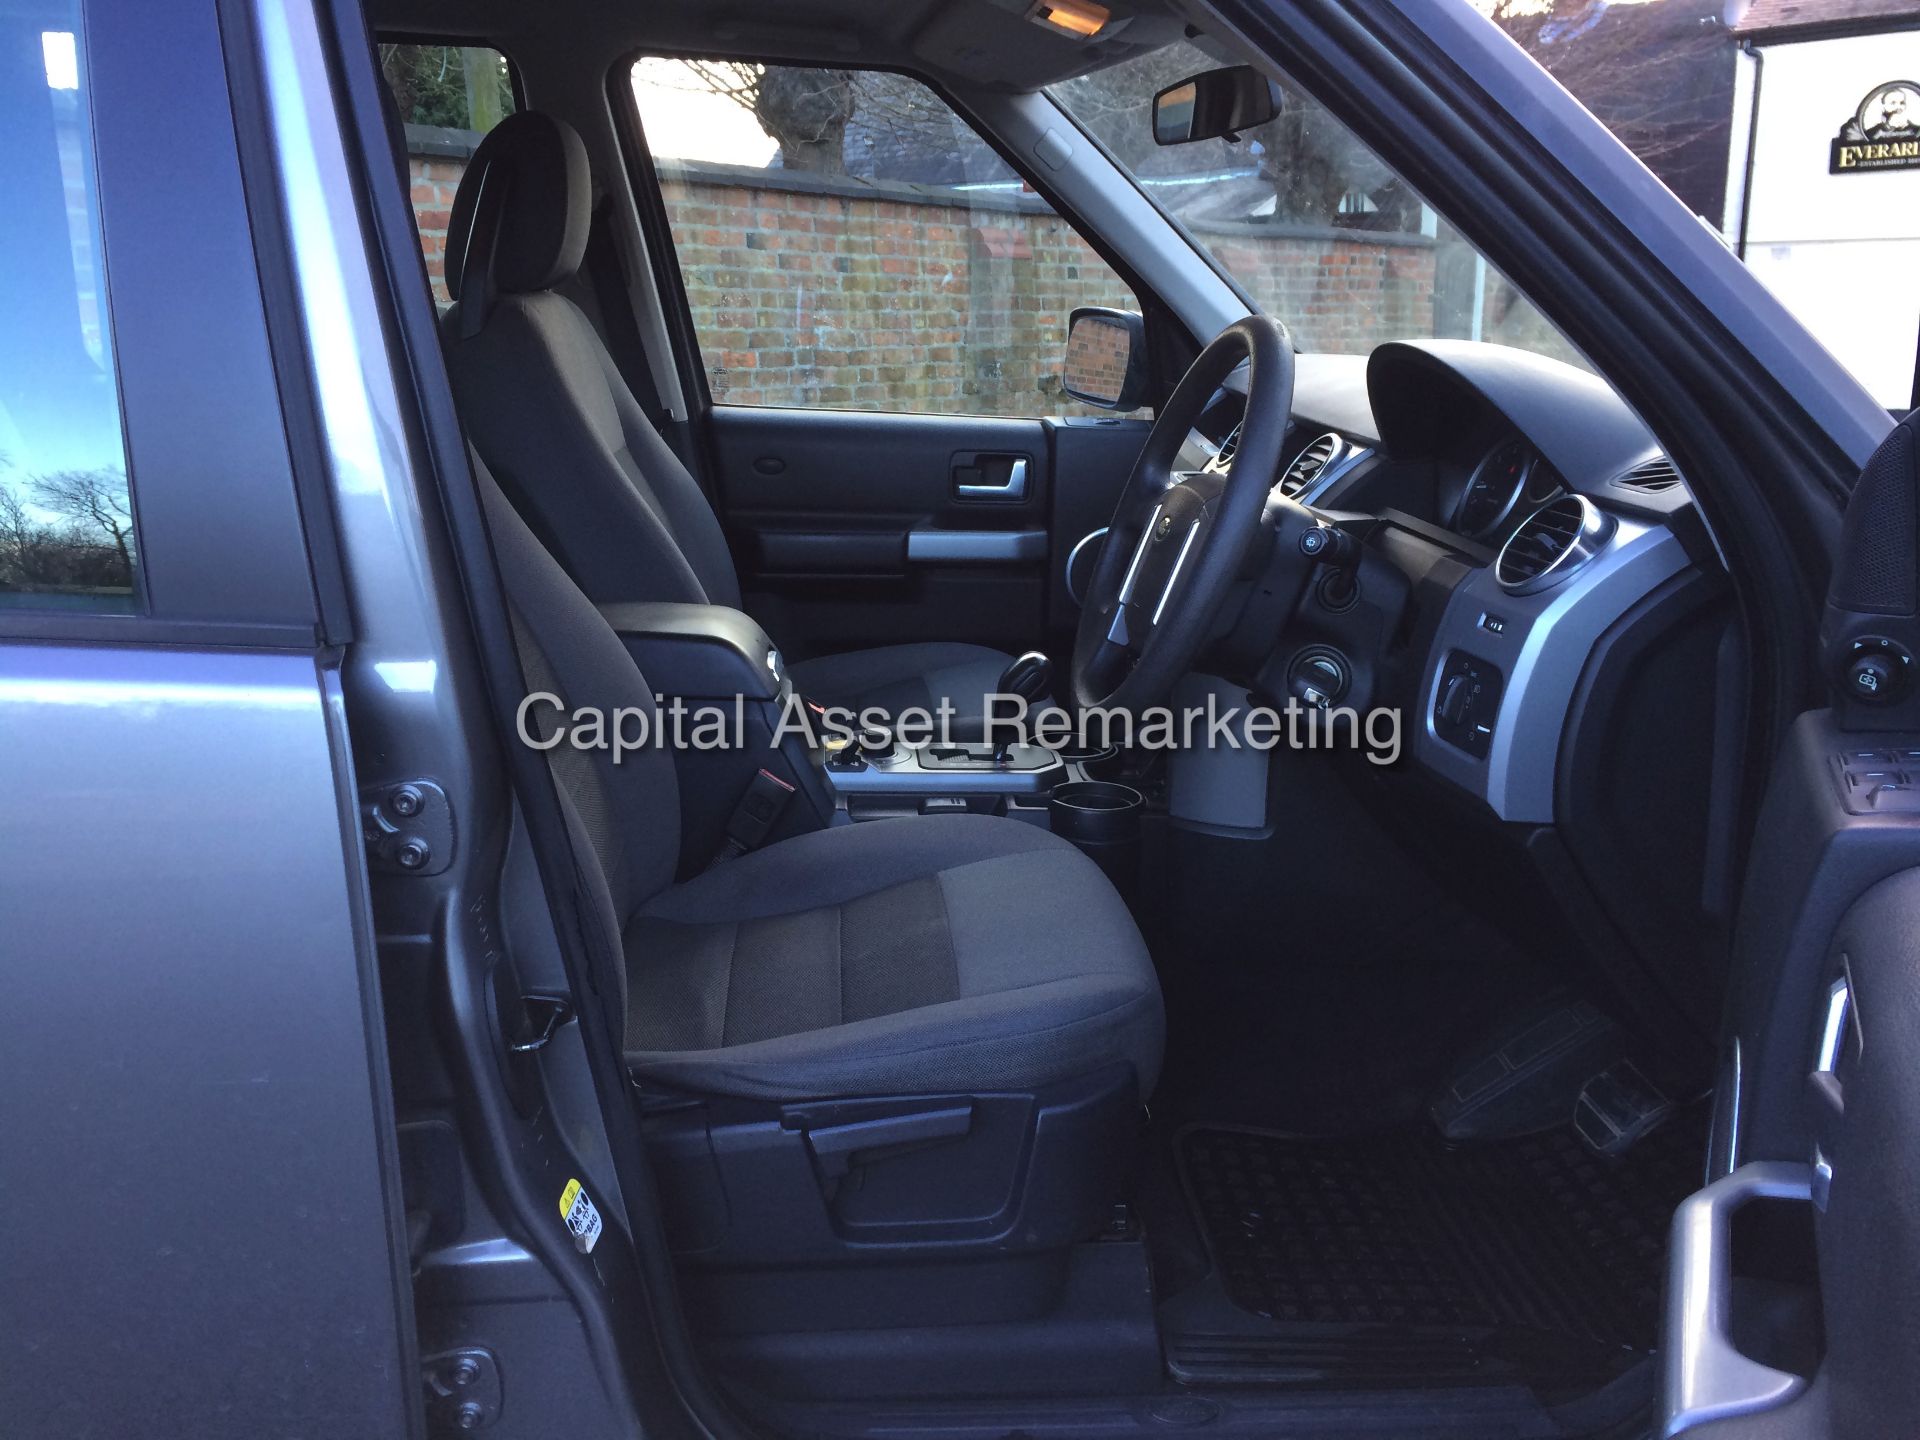 LANDROVER DISCOVERY 3 "TDV6" AUTOMATIC - 7 SEATER (2009 MODEL) NICE SPEC - NO VAT (SAVE 20%) - Image 7 of 23